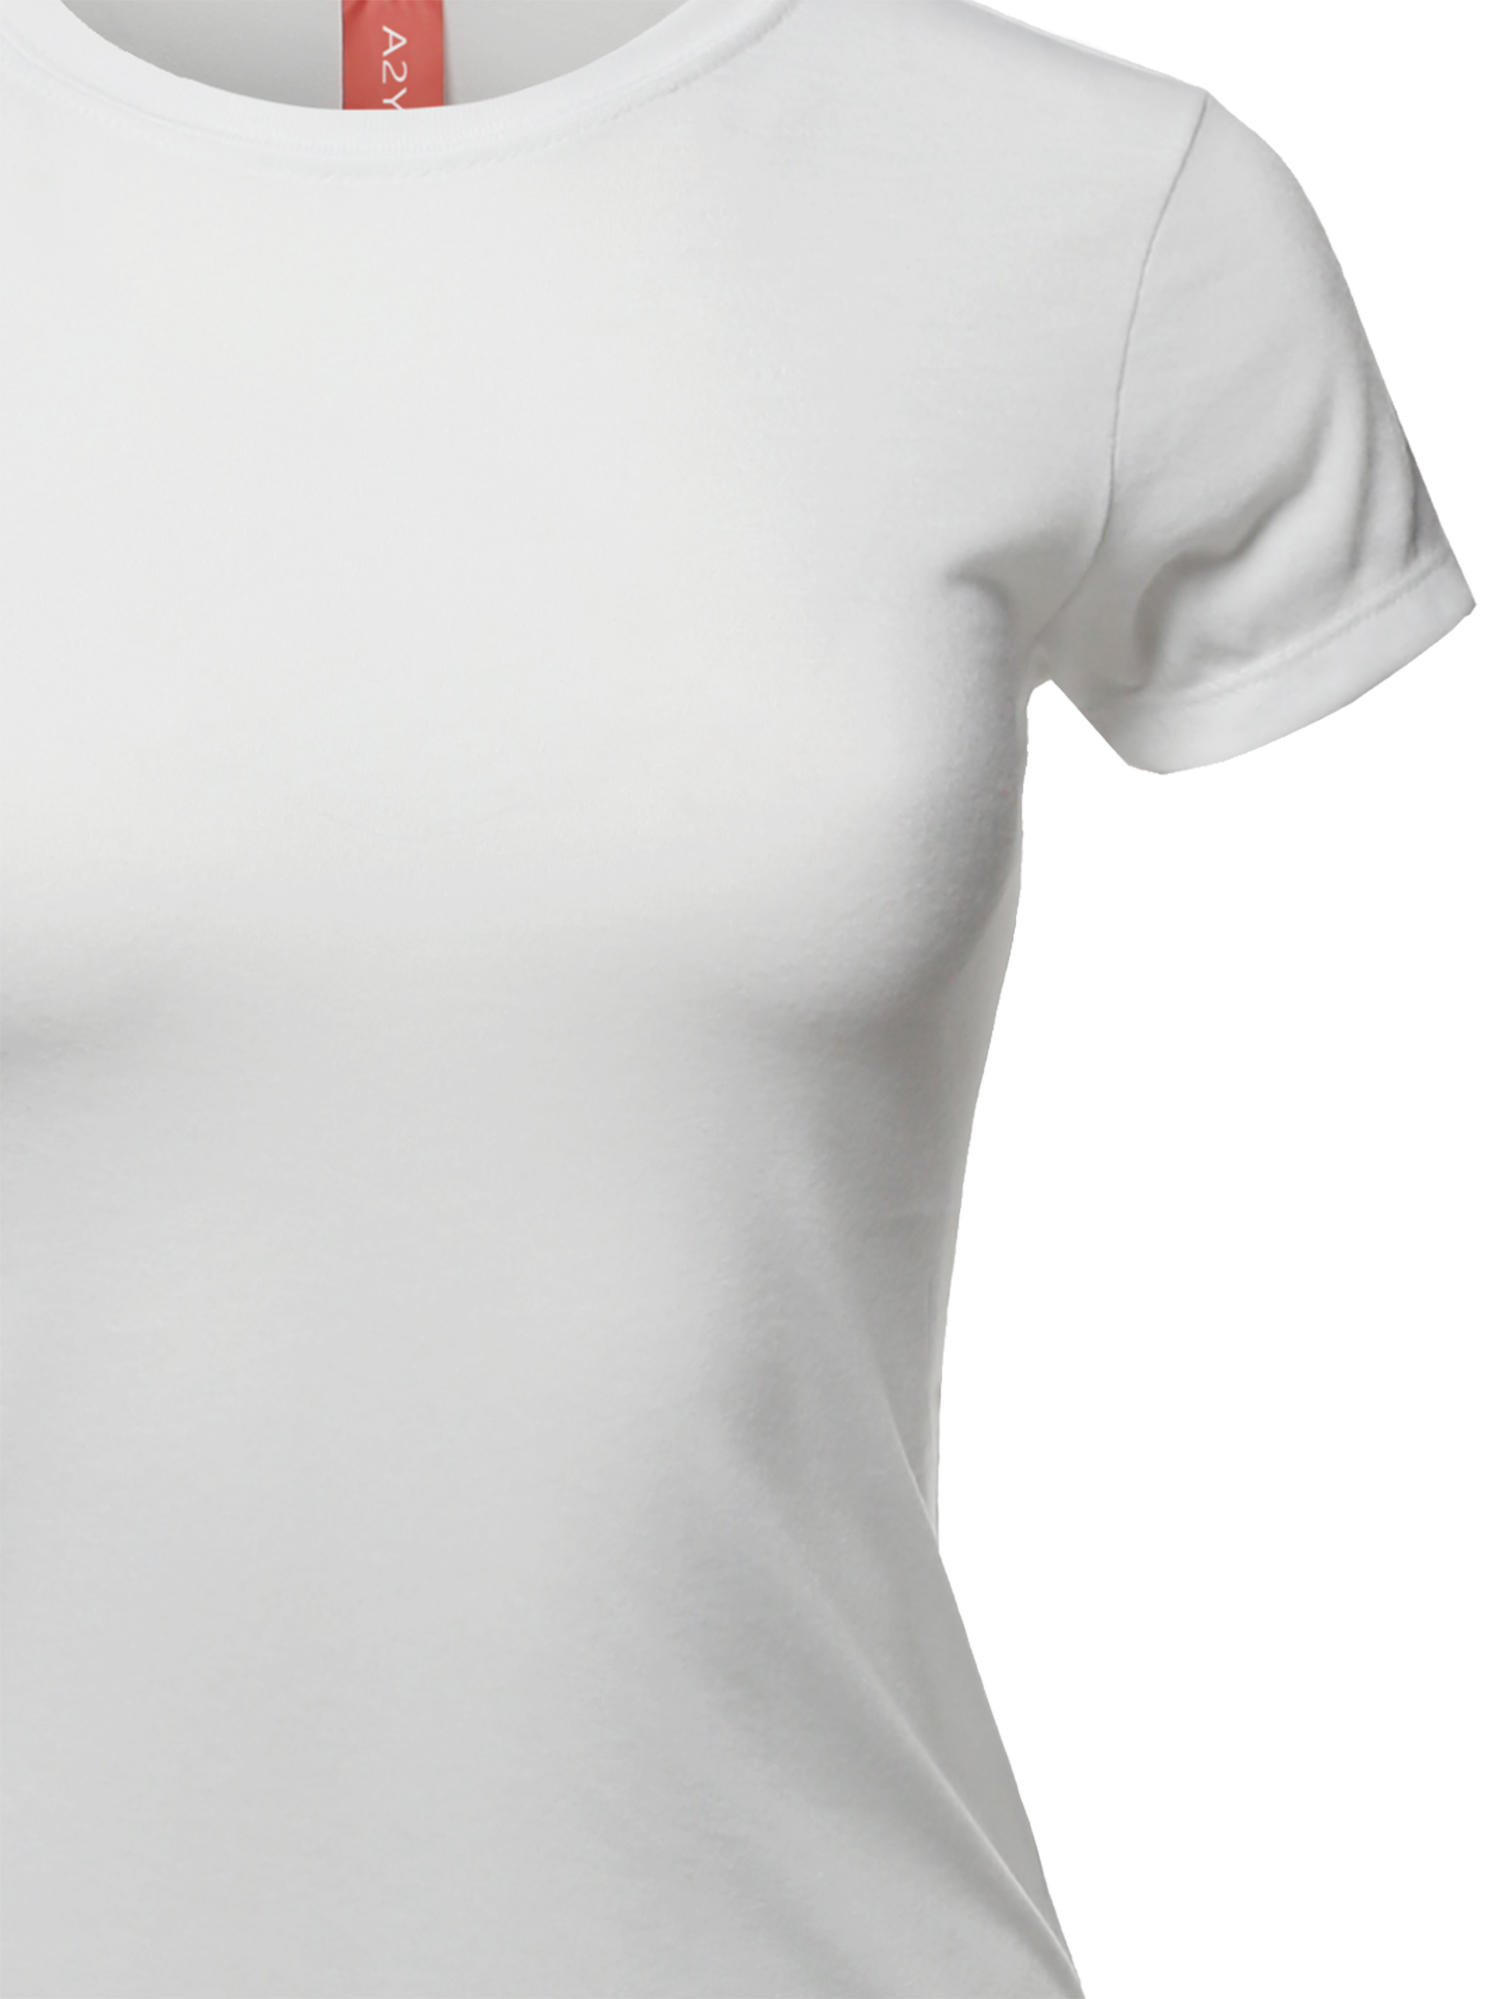 A2Y Women's Basic Solid Premium Short Sleeve Crew Neck Scoop Bottom T Shirt Tee Tops 3-Pack 3 Pack - White S - image 3 of 4